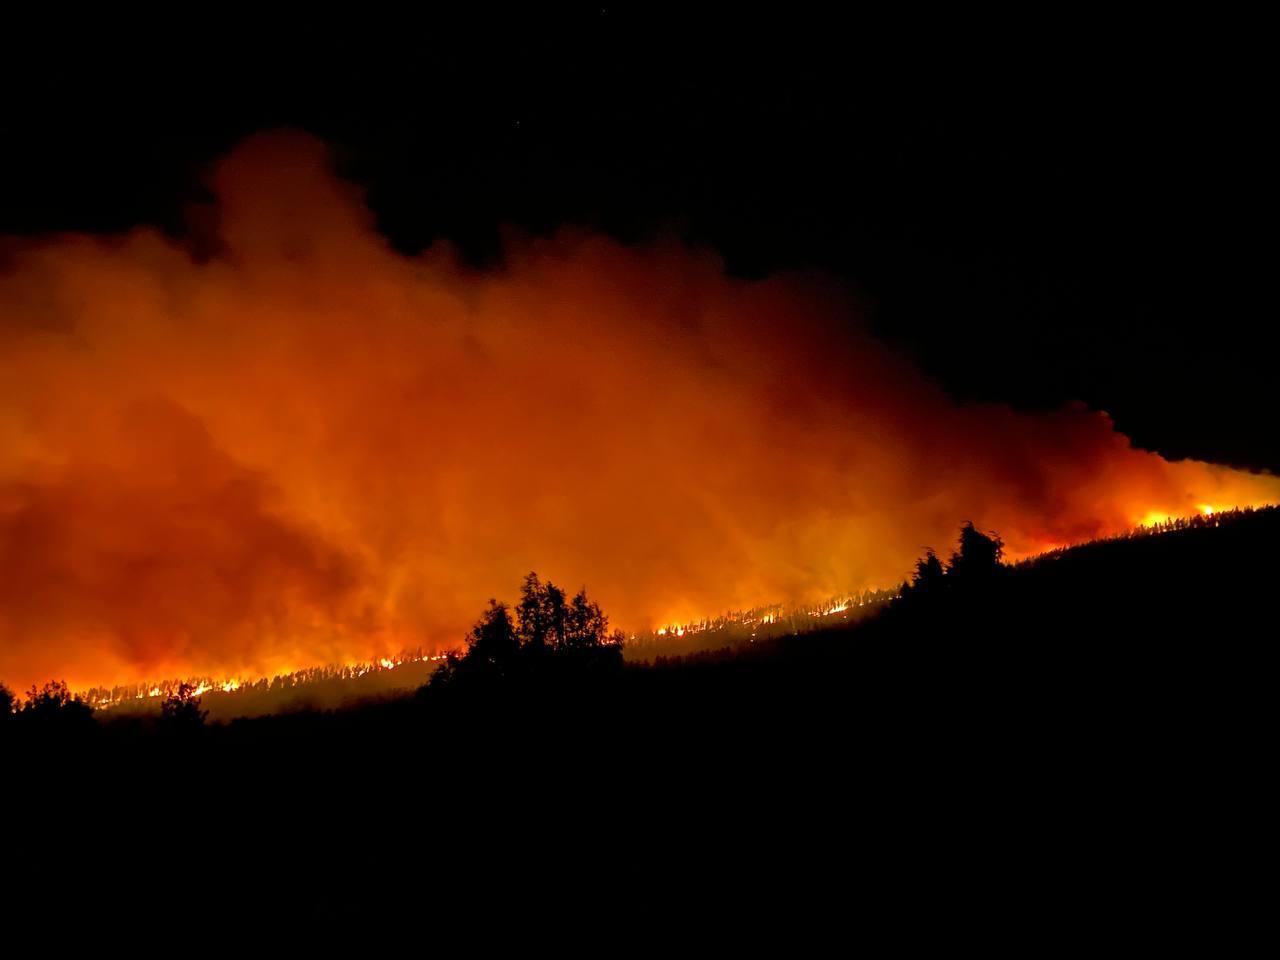 Fire activity above Holman as seen from Hwy 518 during the night shift on May 8, 2022